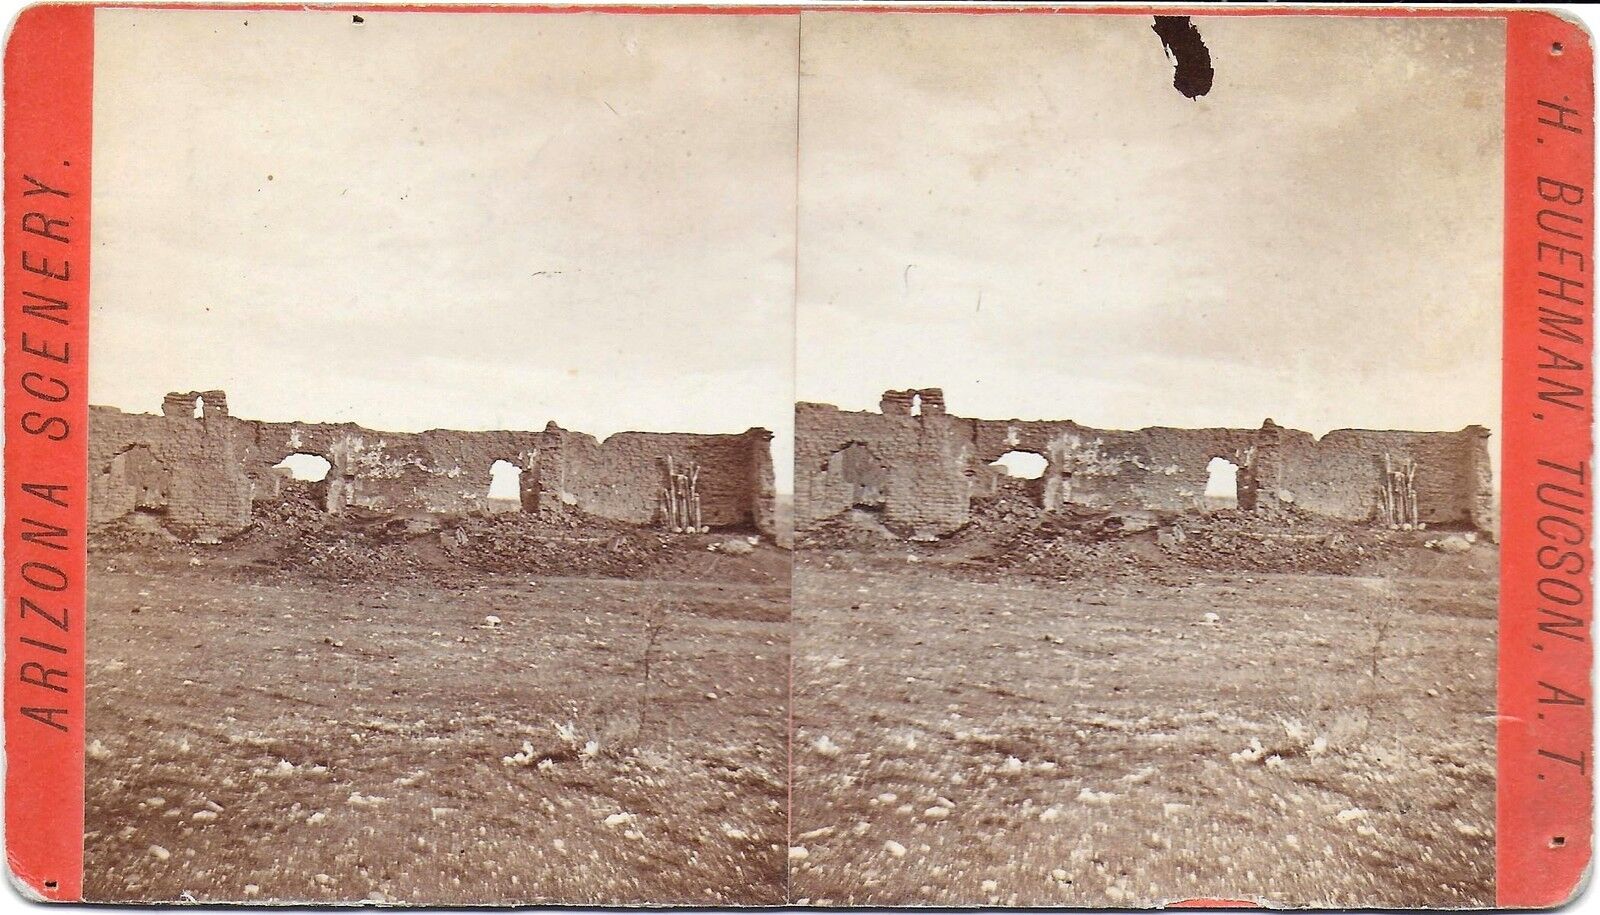 Henry Buehman Stereoview of Unknown Building Ruins in Arizona c1880-90s